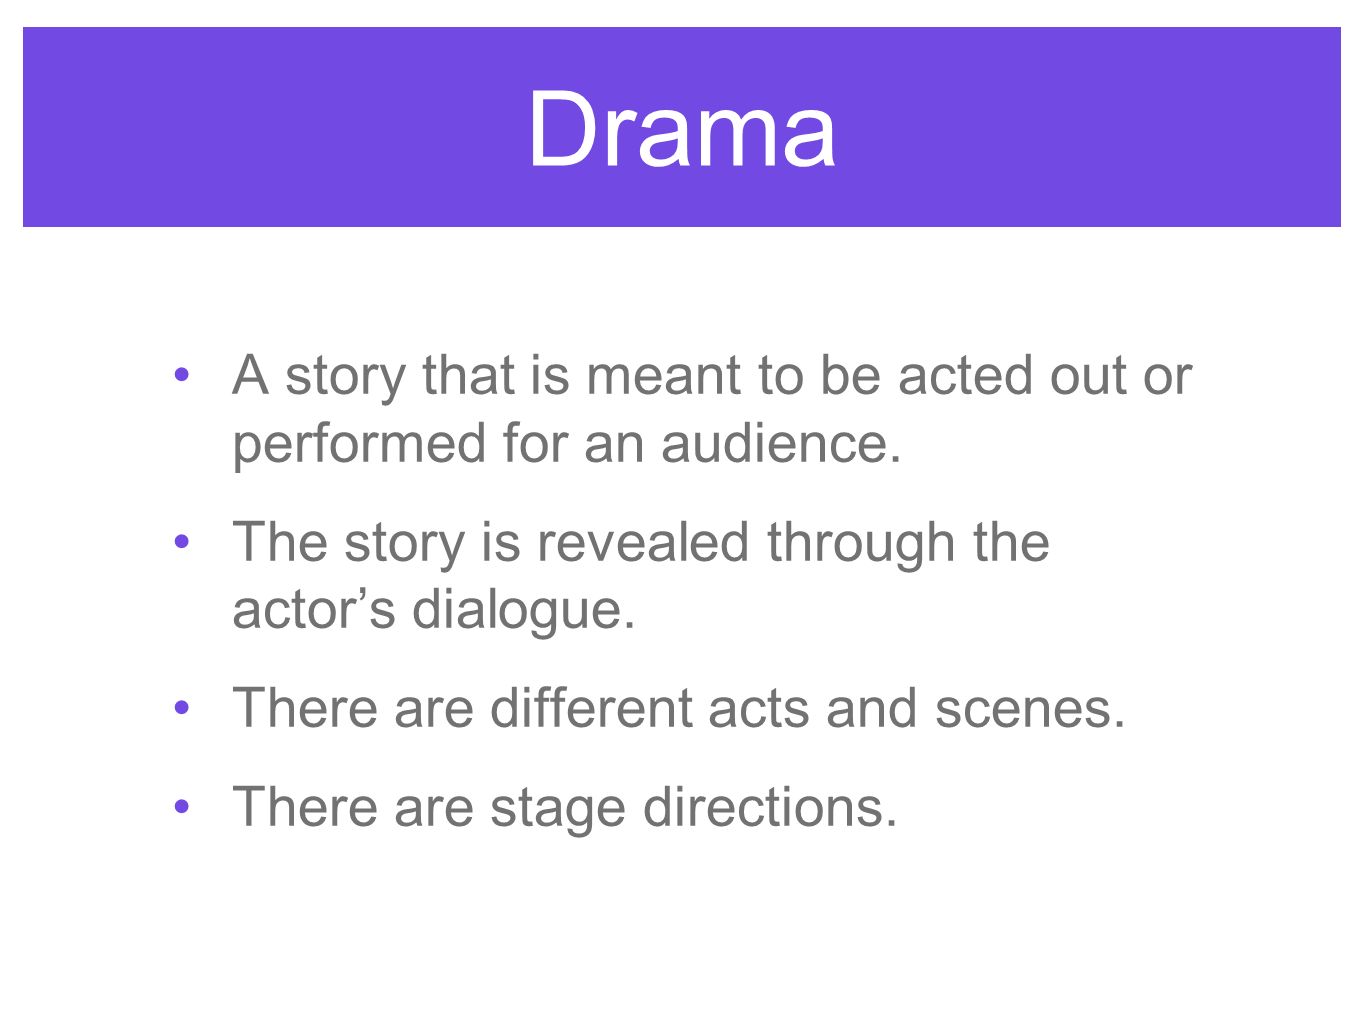 Drama A story that is meant to be acted out or performed for an audience. The story is revealed through the actor’s dialogue.